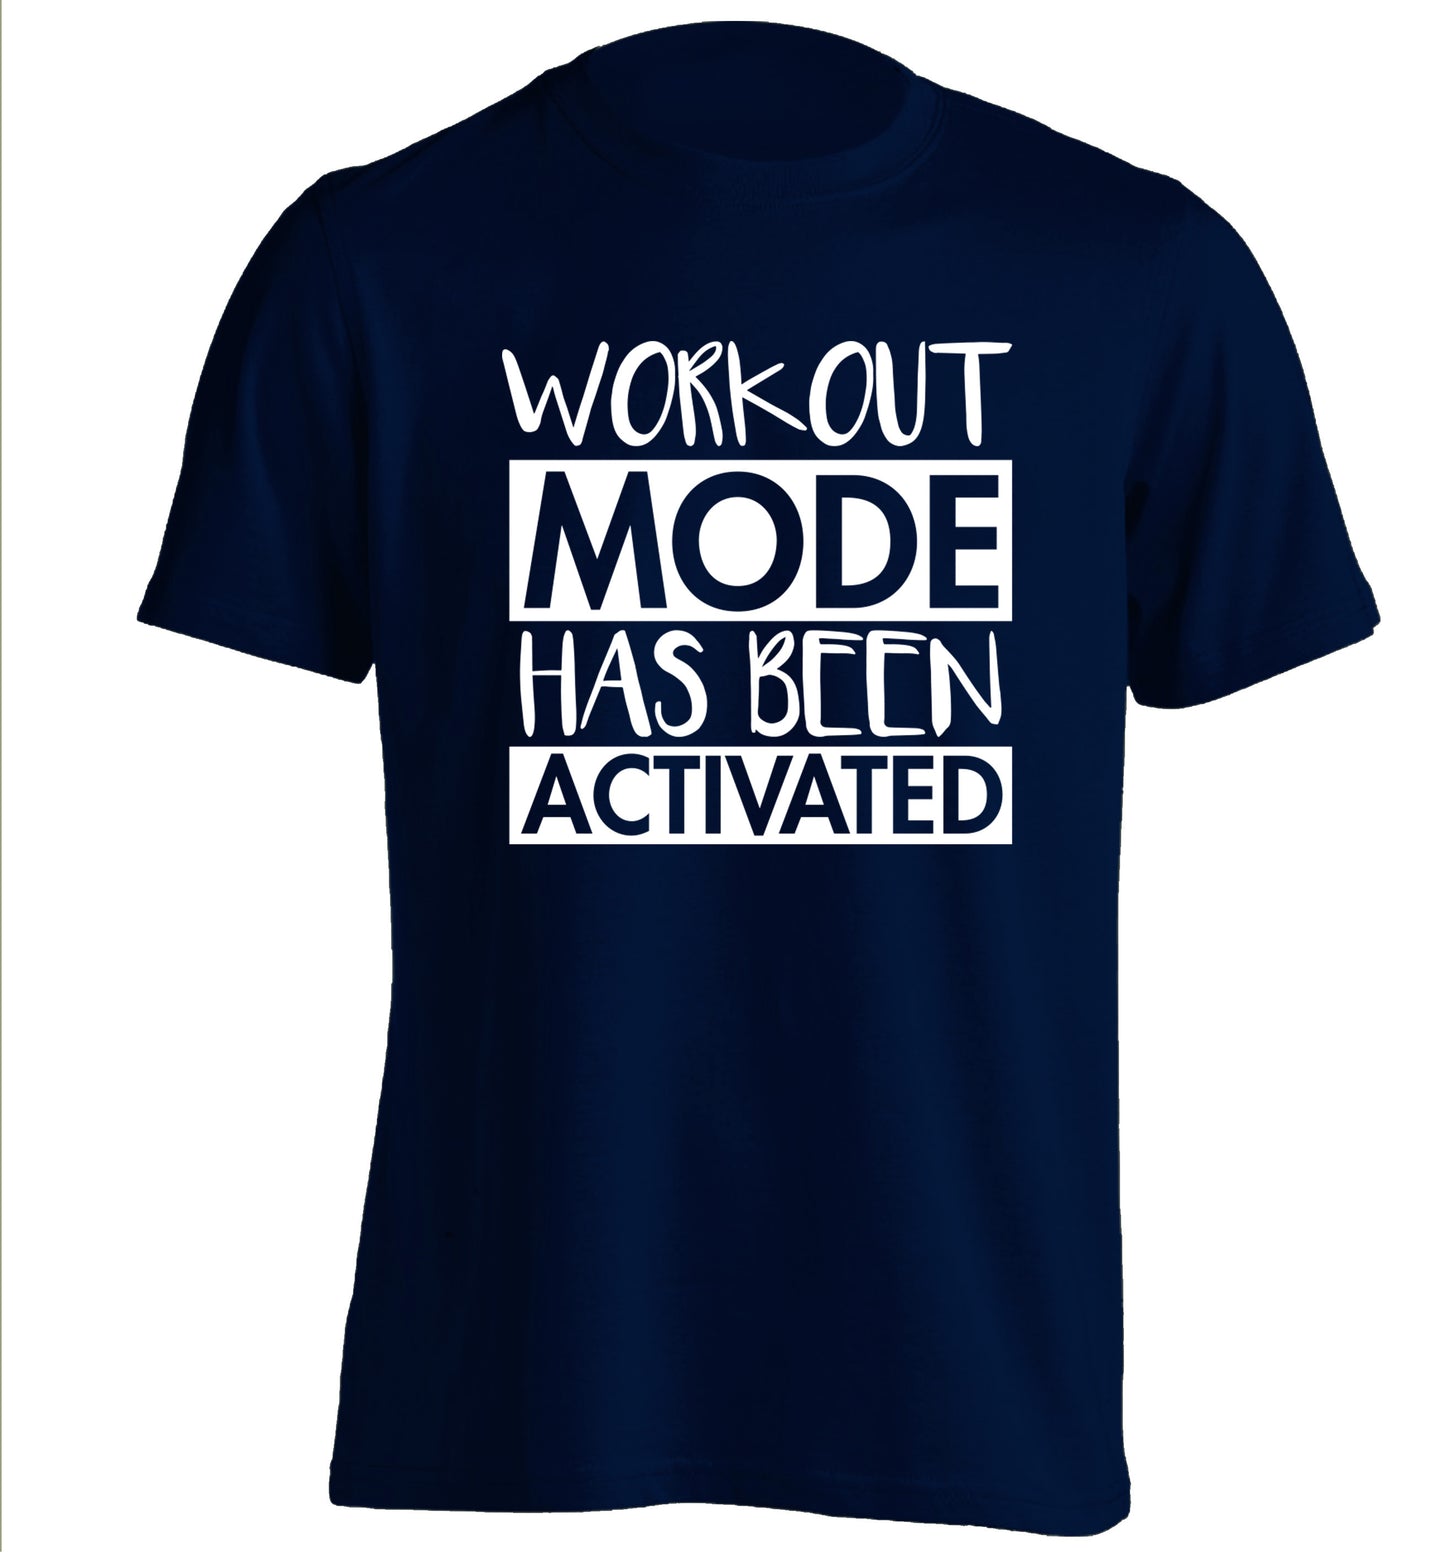 Workout mode has been activated adults unisex navy Tshirt 2XL